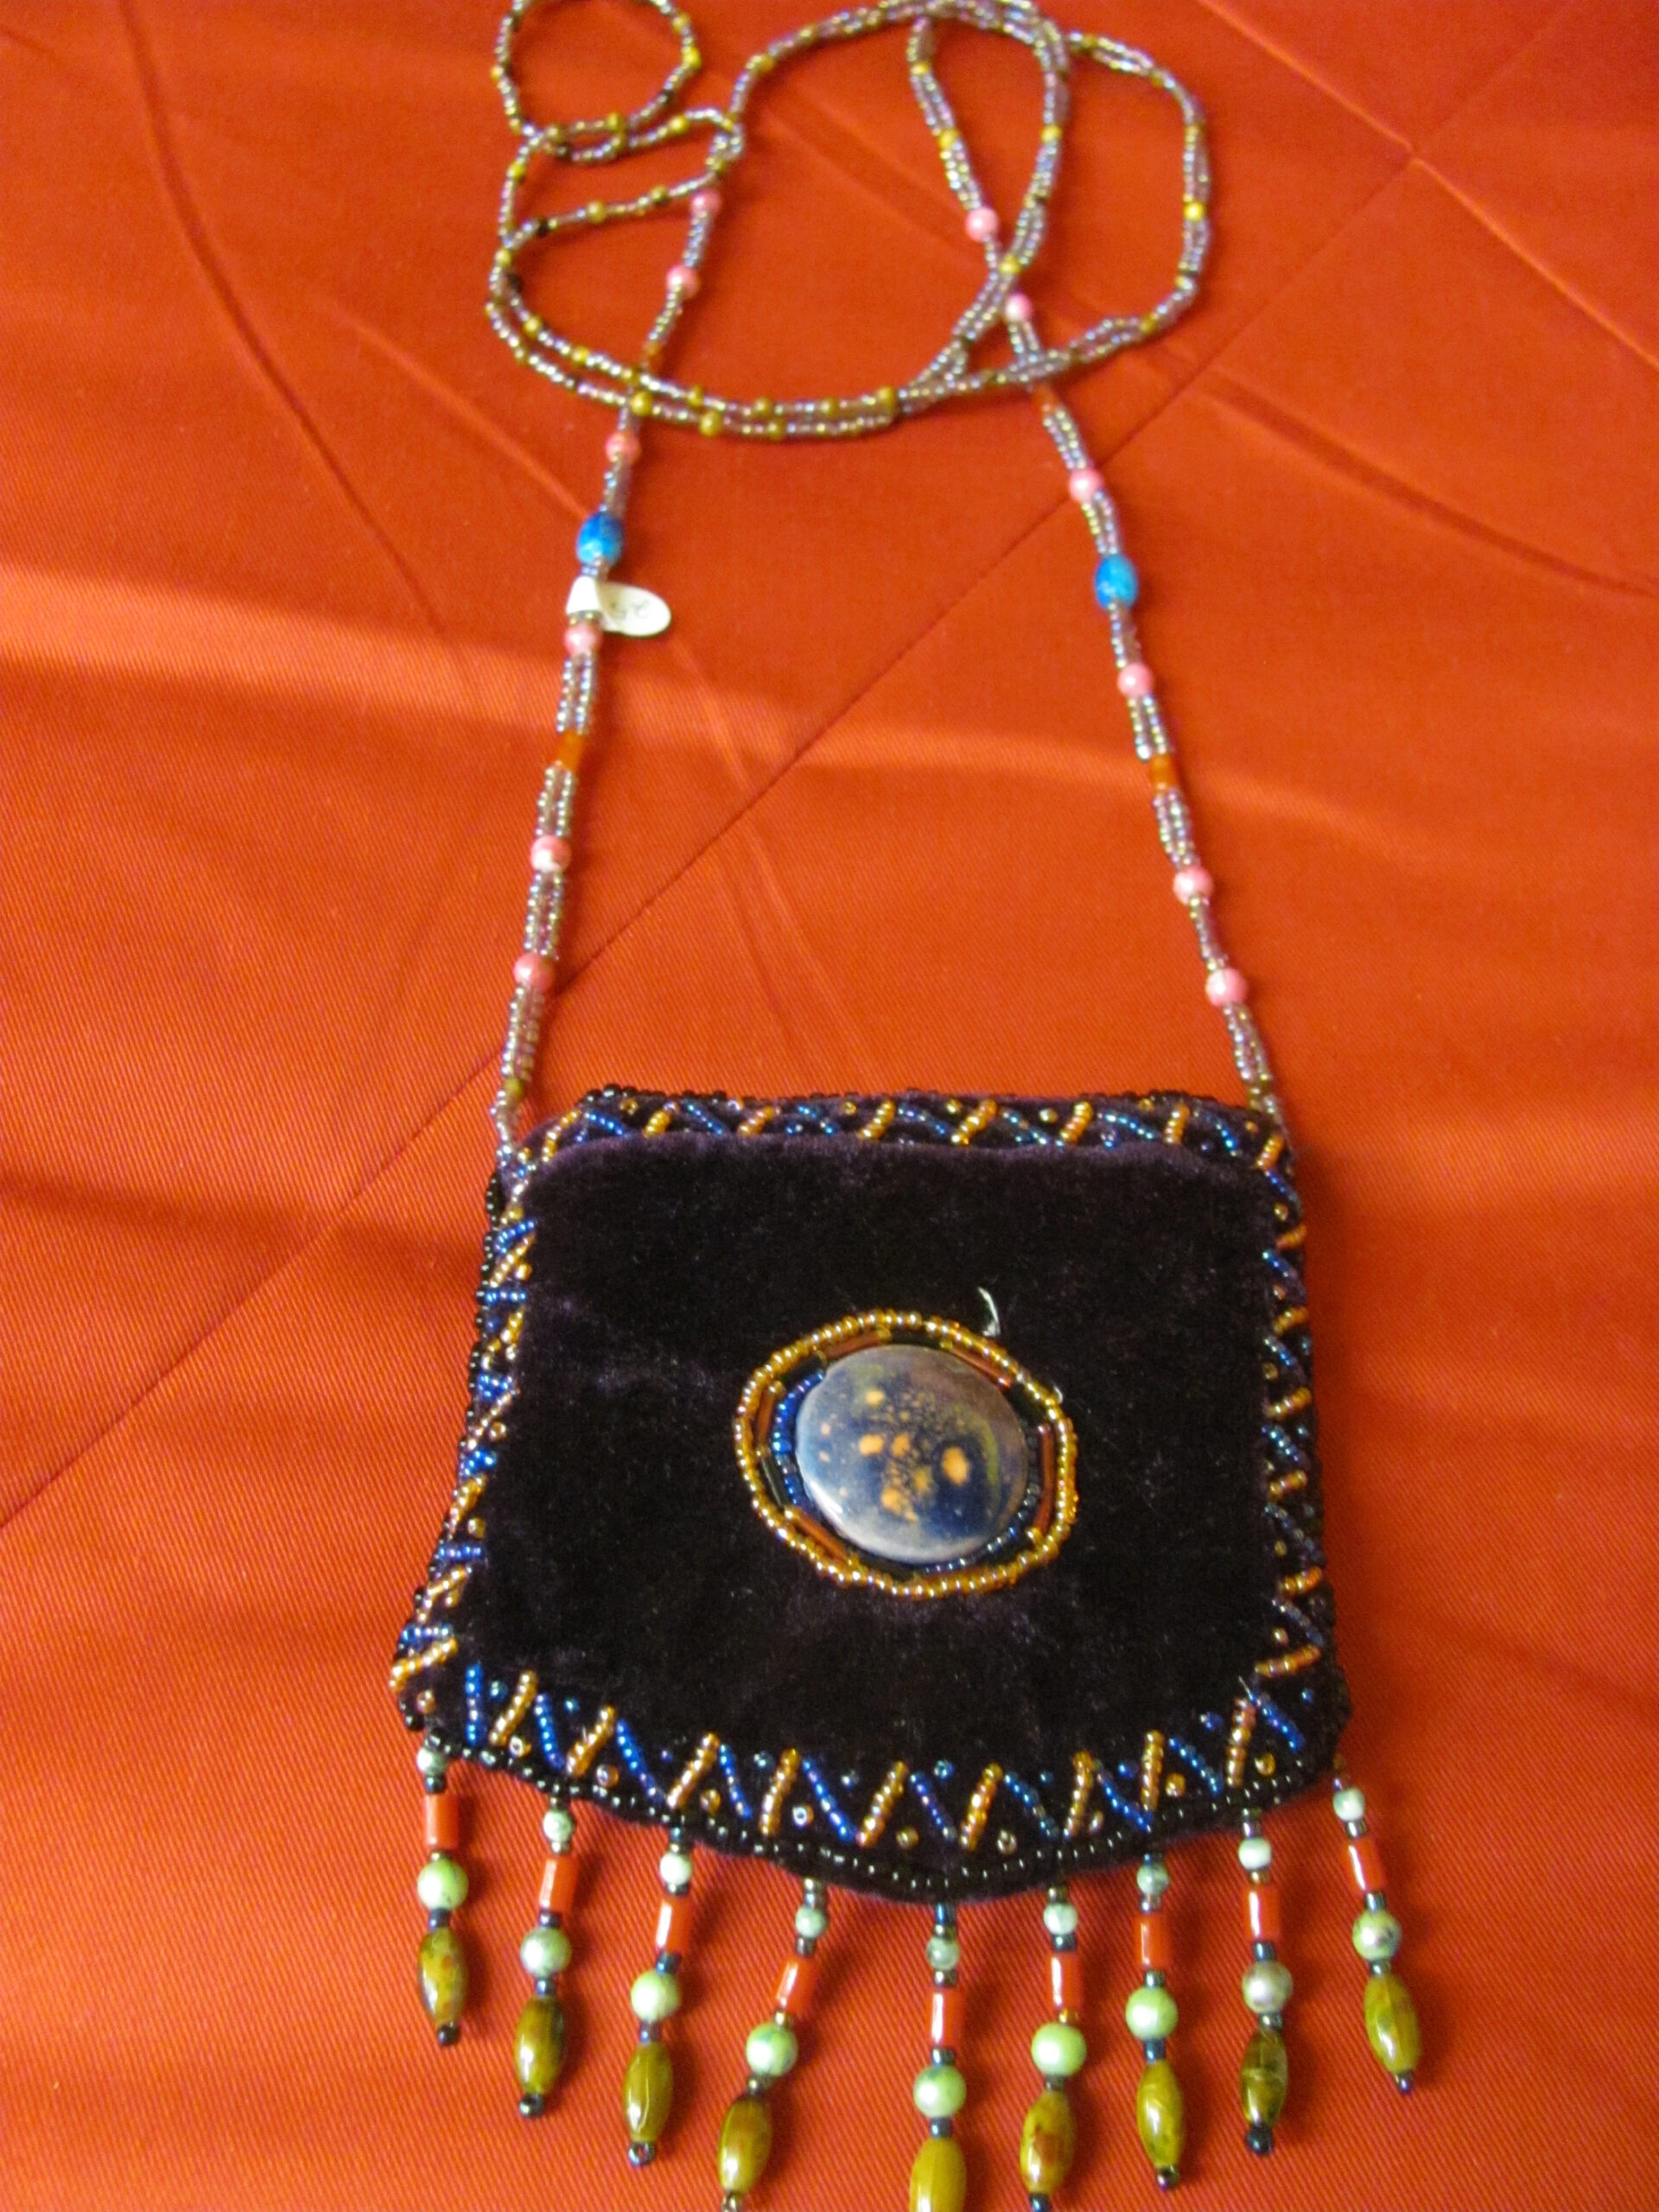 1Pc Handmade Tibet Style Embroidered Handbag Hippie Bag [bag-s-ch21] -  $6.00 : Sunrise Imports, Where Everyone Pays Wholesale Price